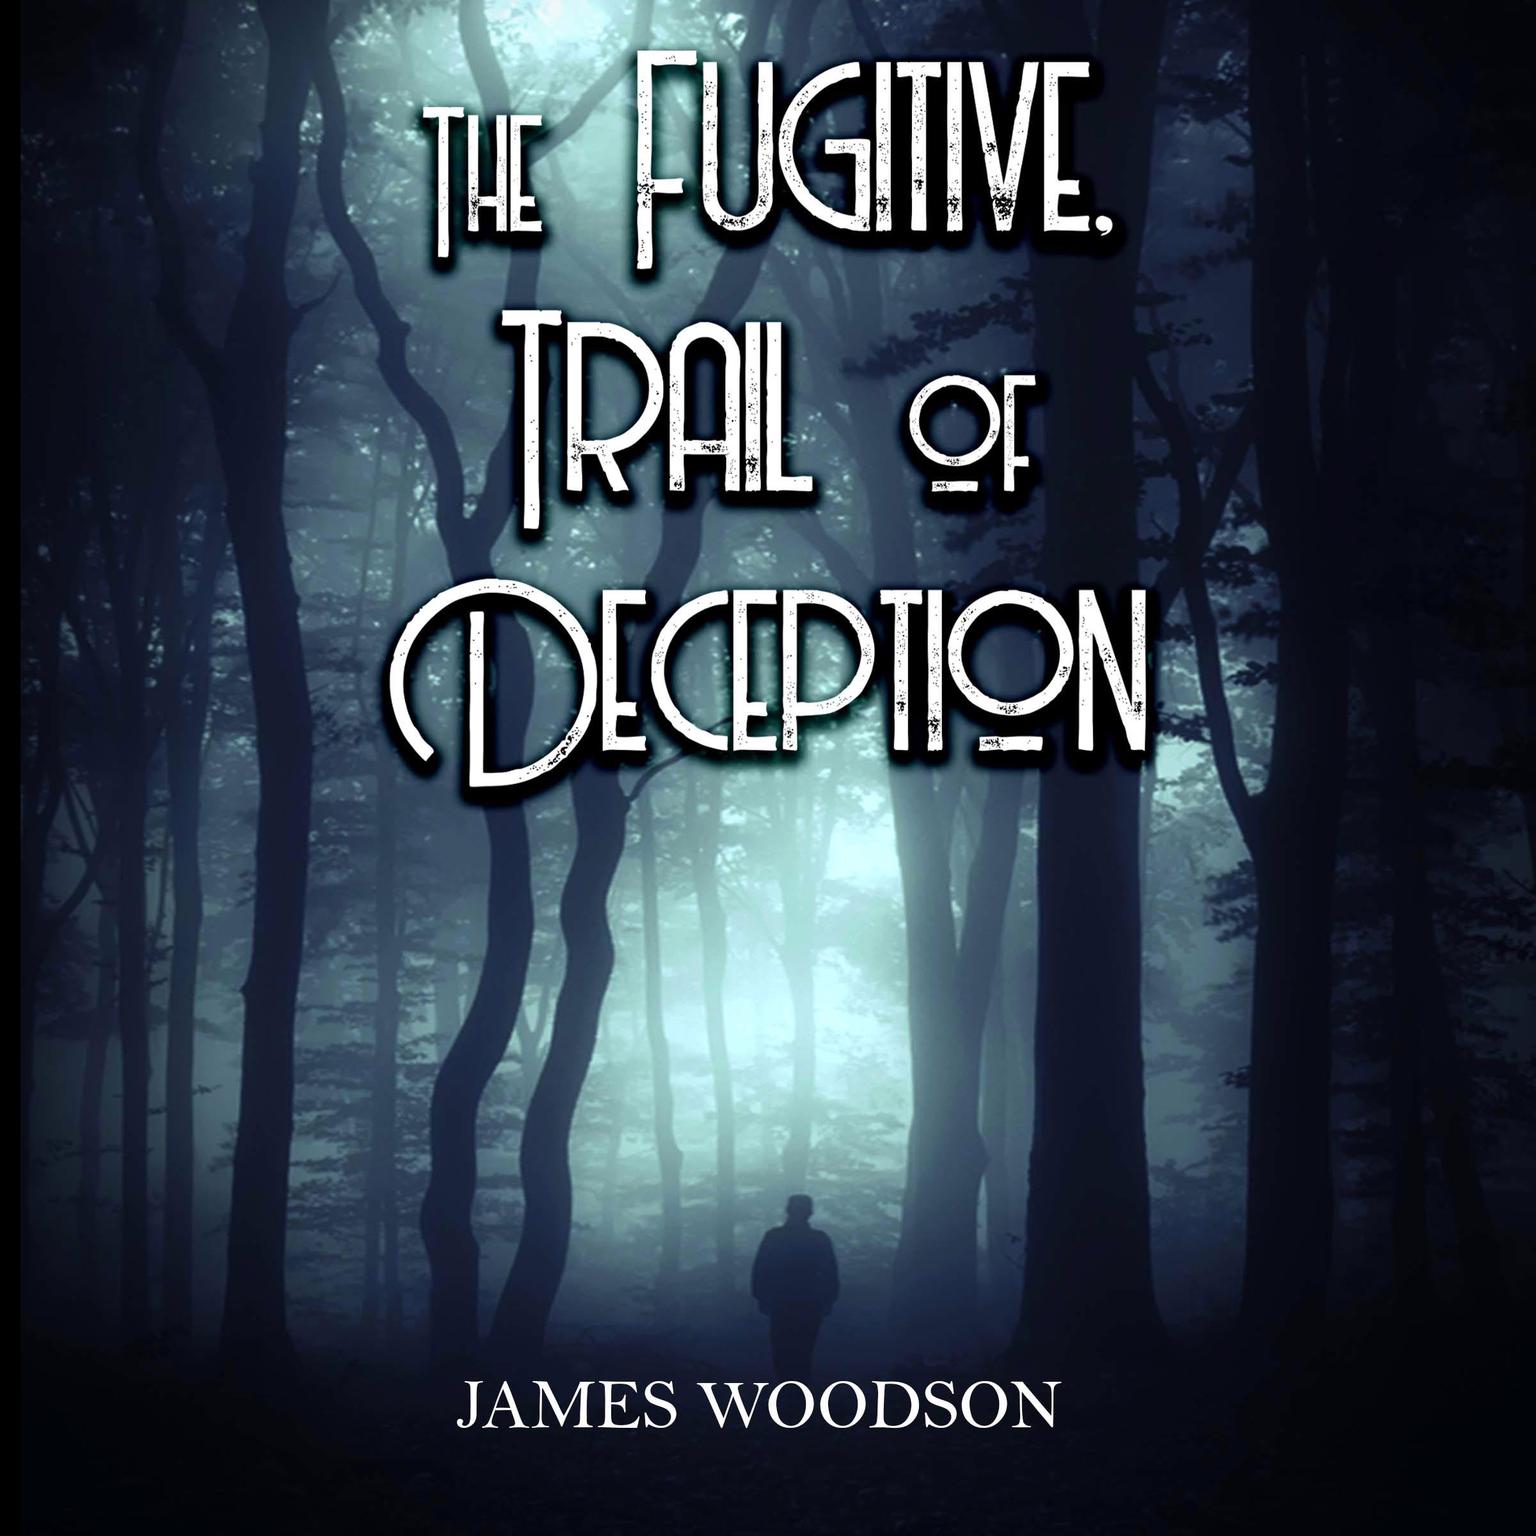 The Fugitive Trail Of Deception Audiobook, by James Woodson